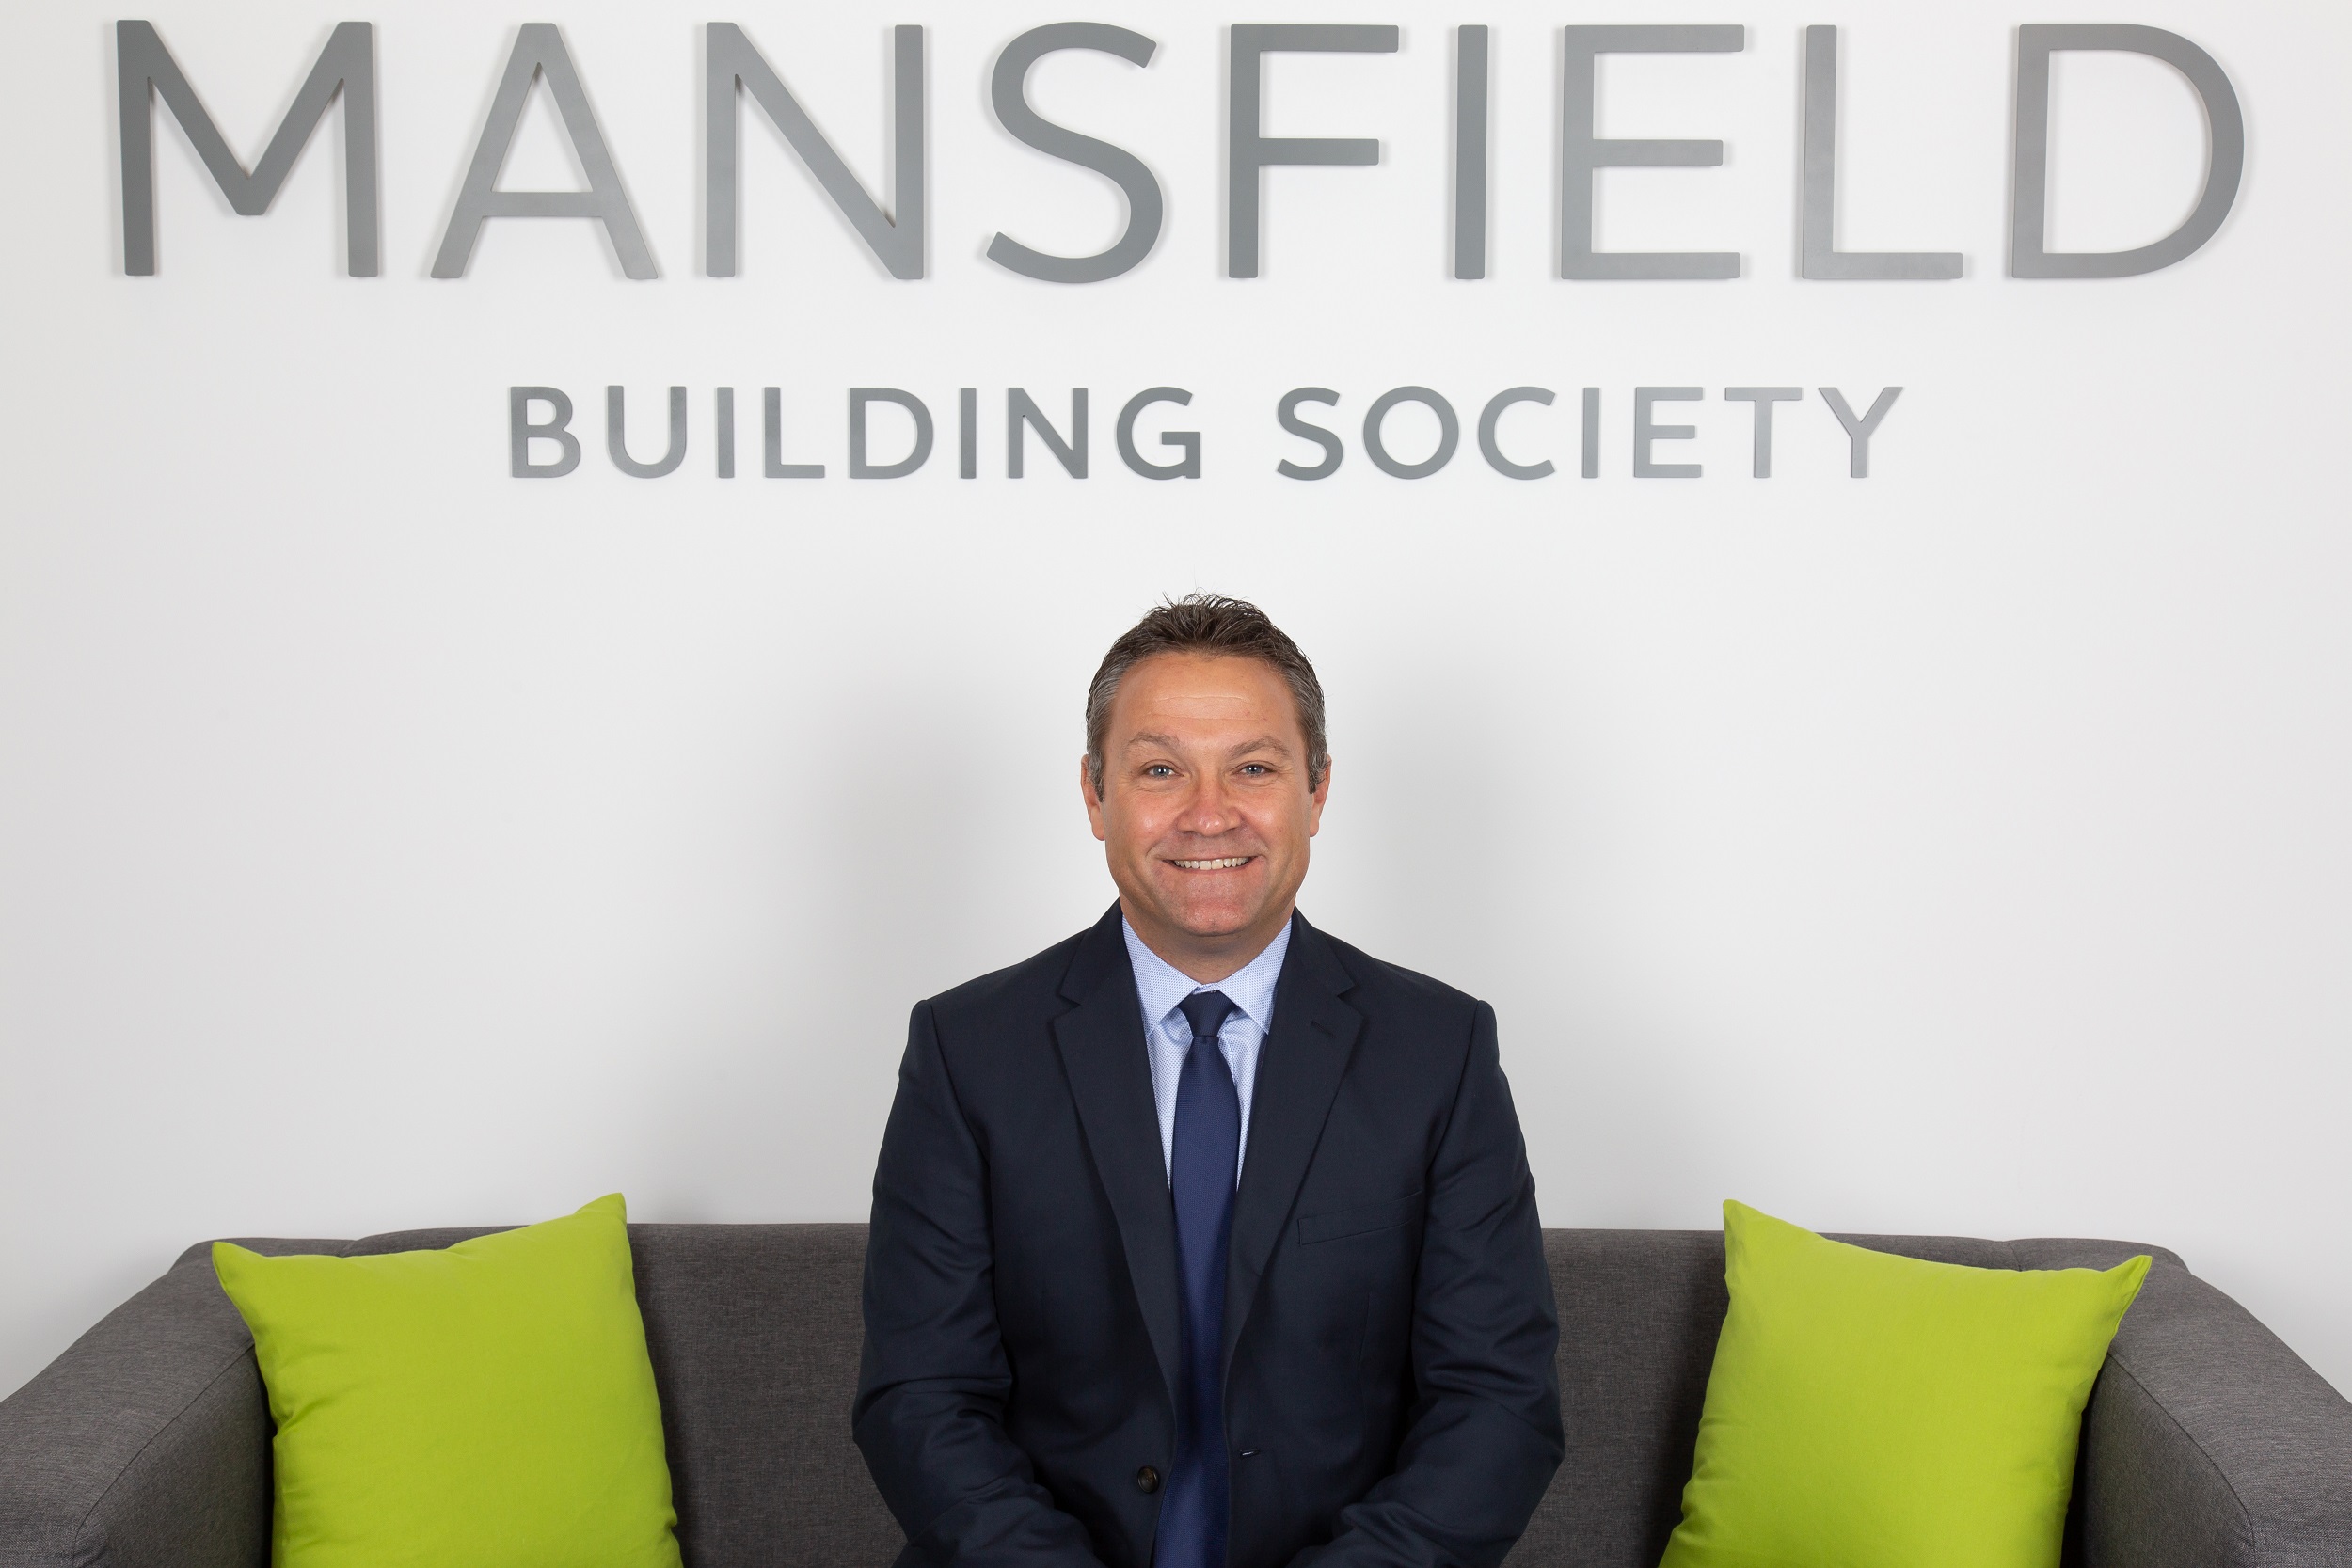 The Mansfield simplifies application process with DirectID